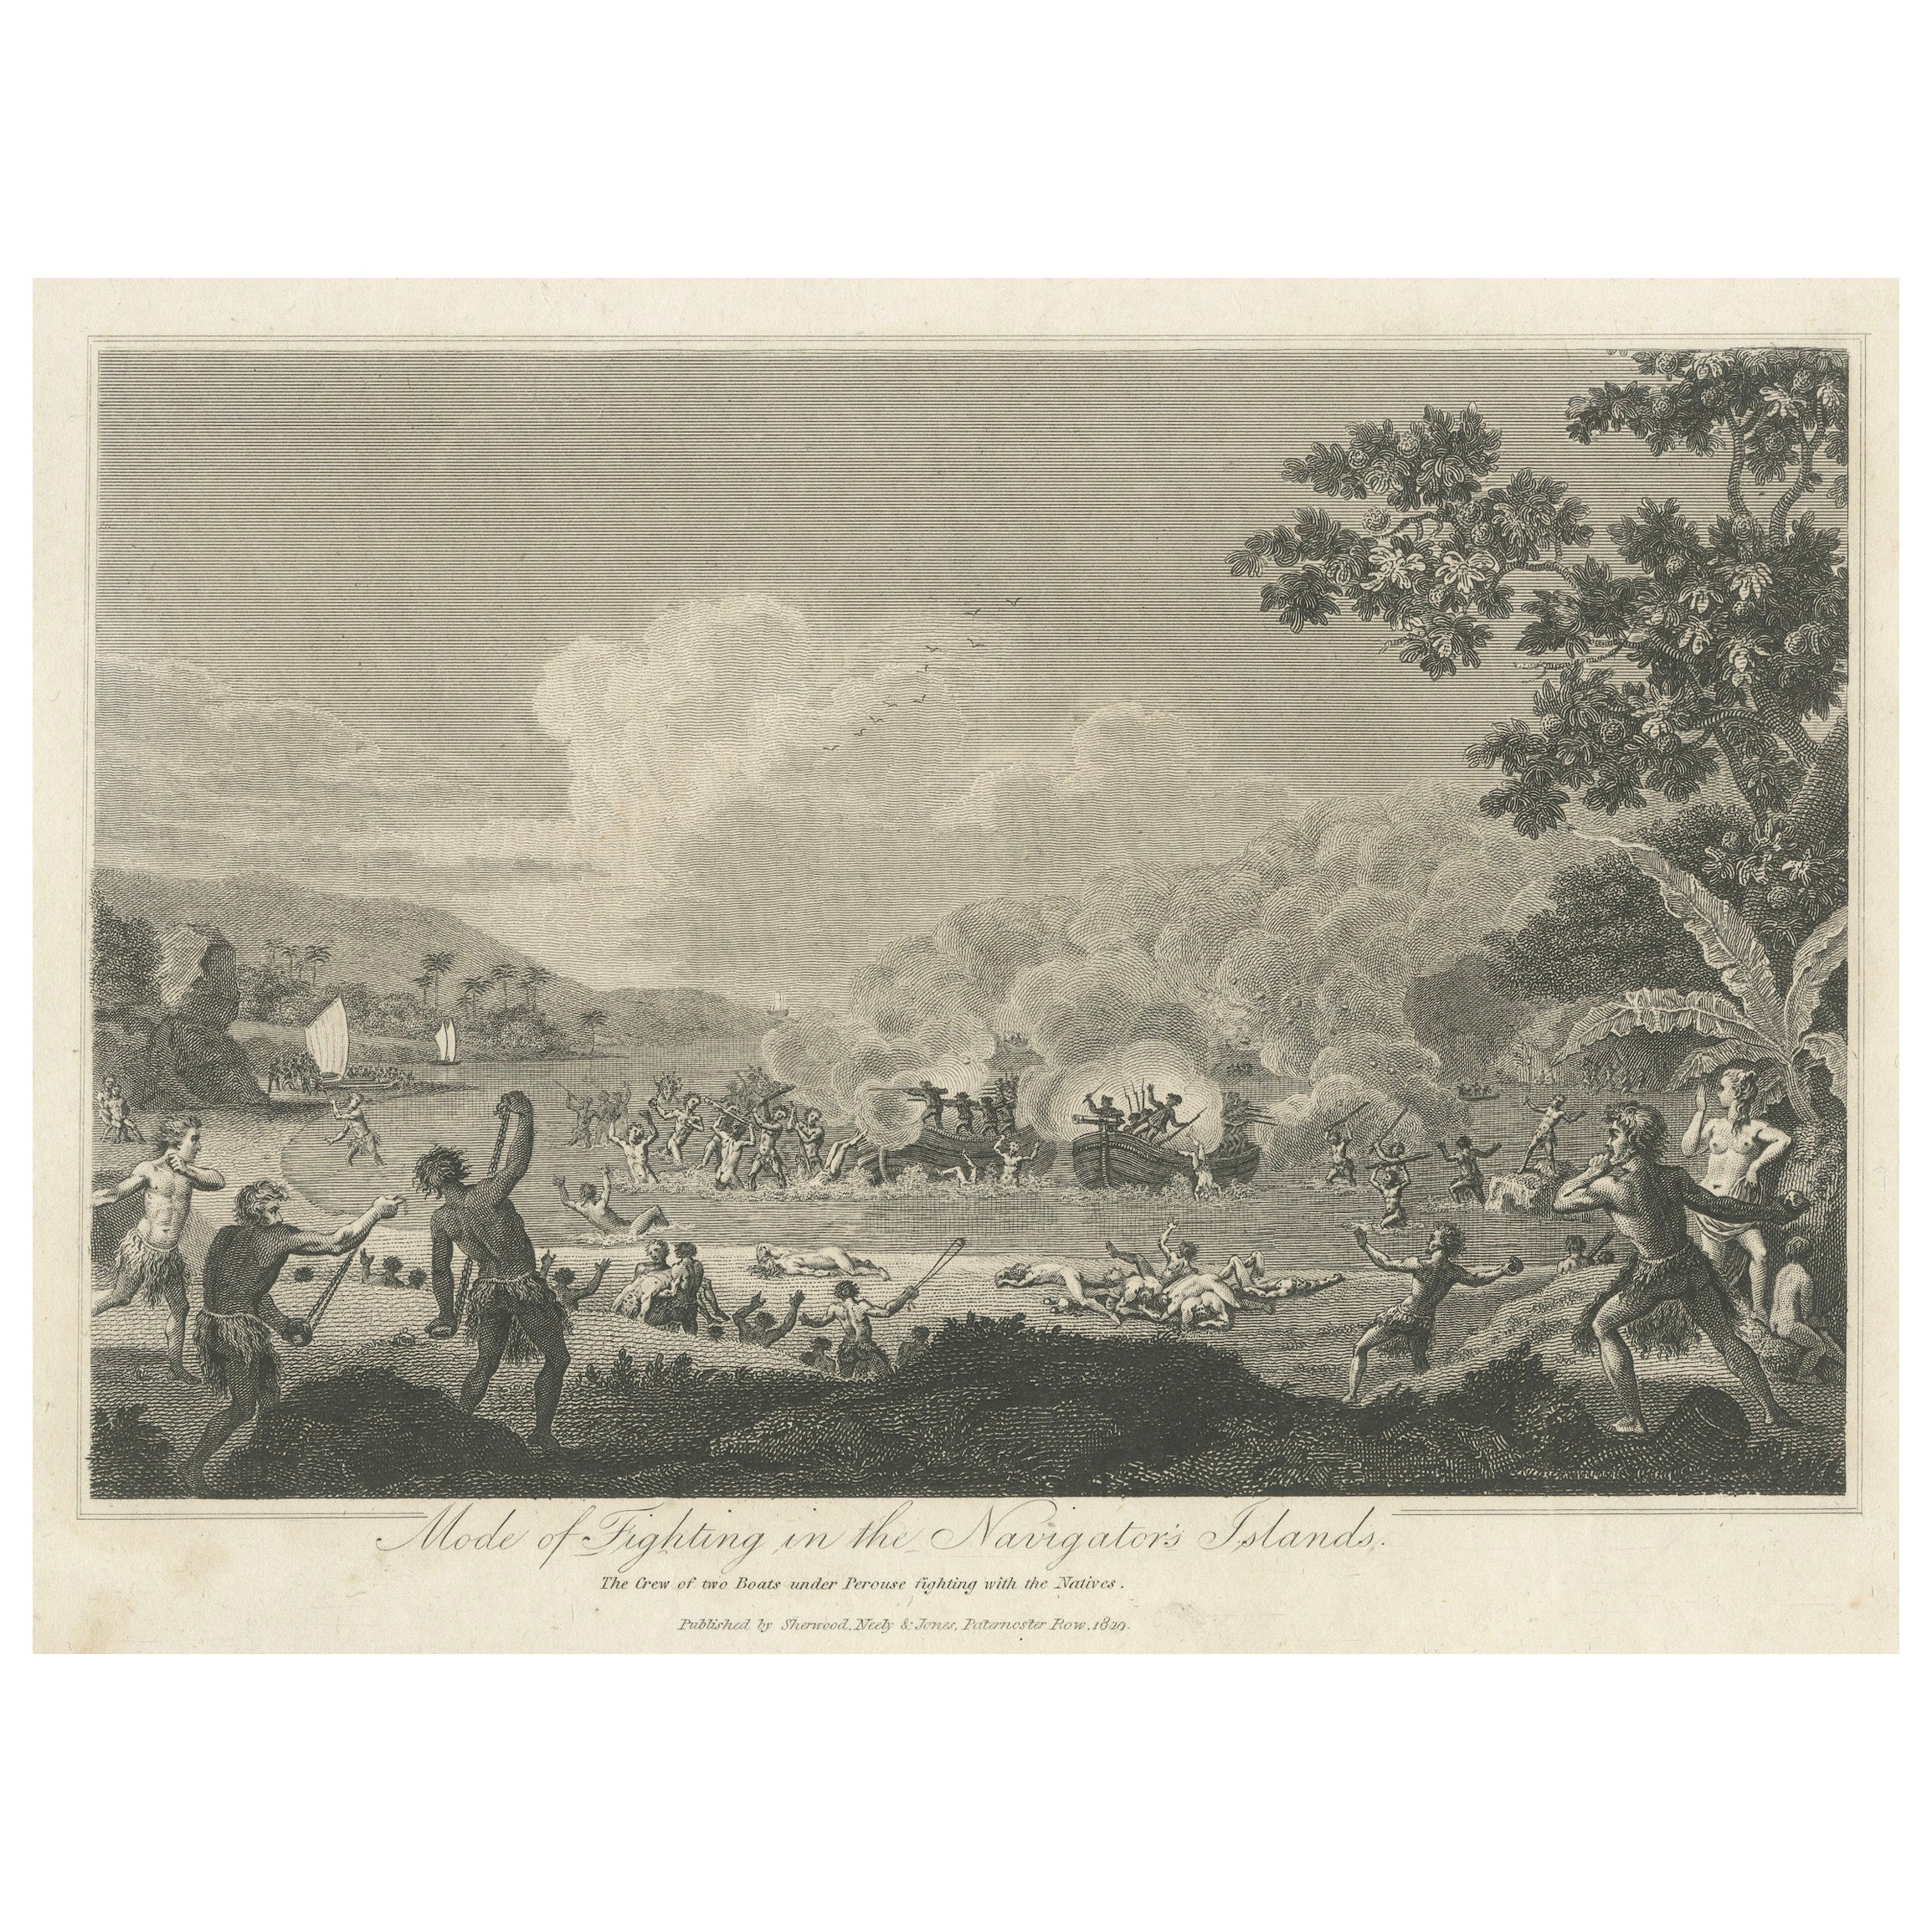 Confrontation and Culture: Samoan Warrior Engagement, Published in 1820